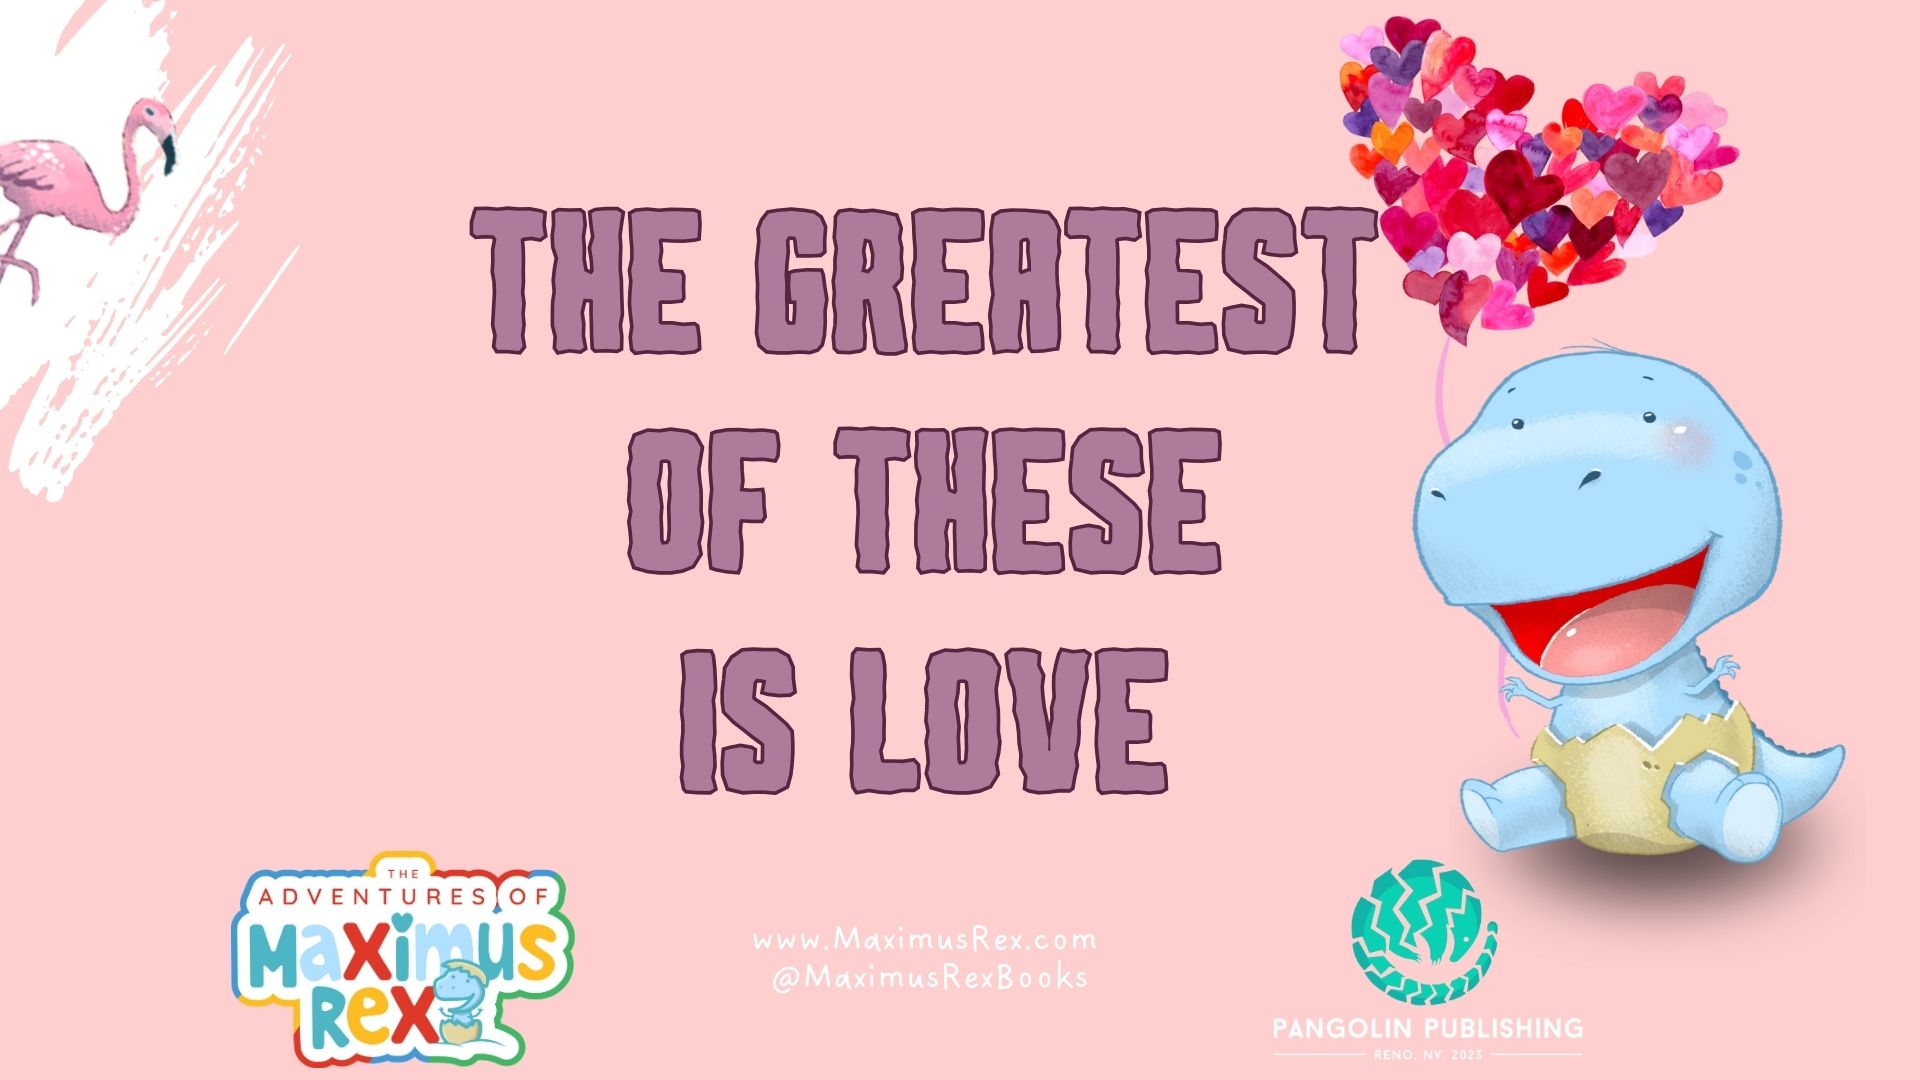 And the Greatest of These is Love